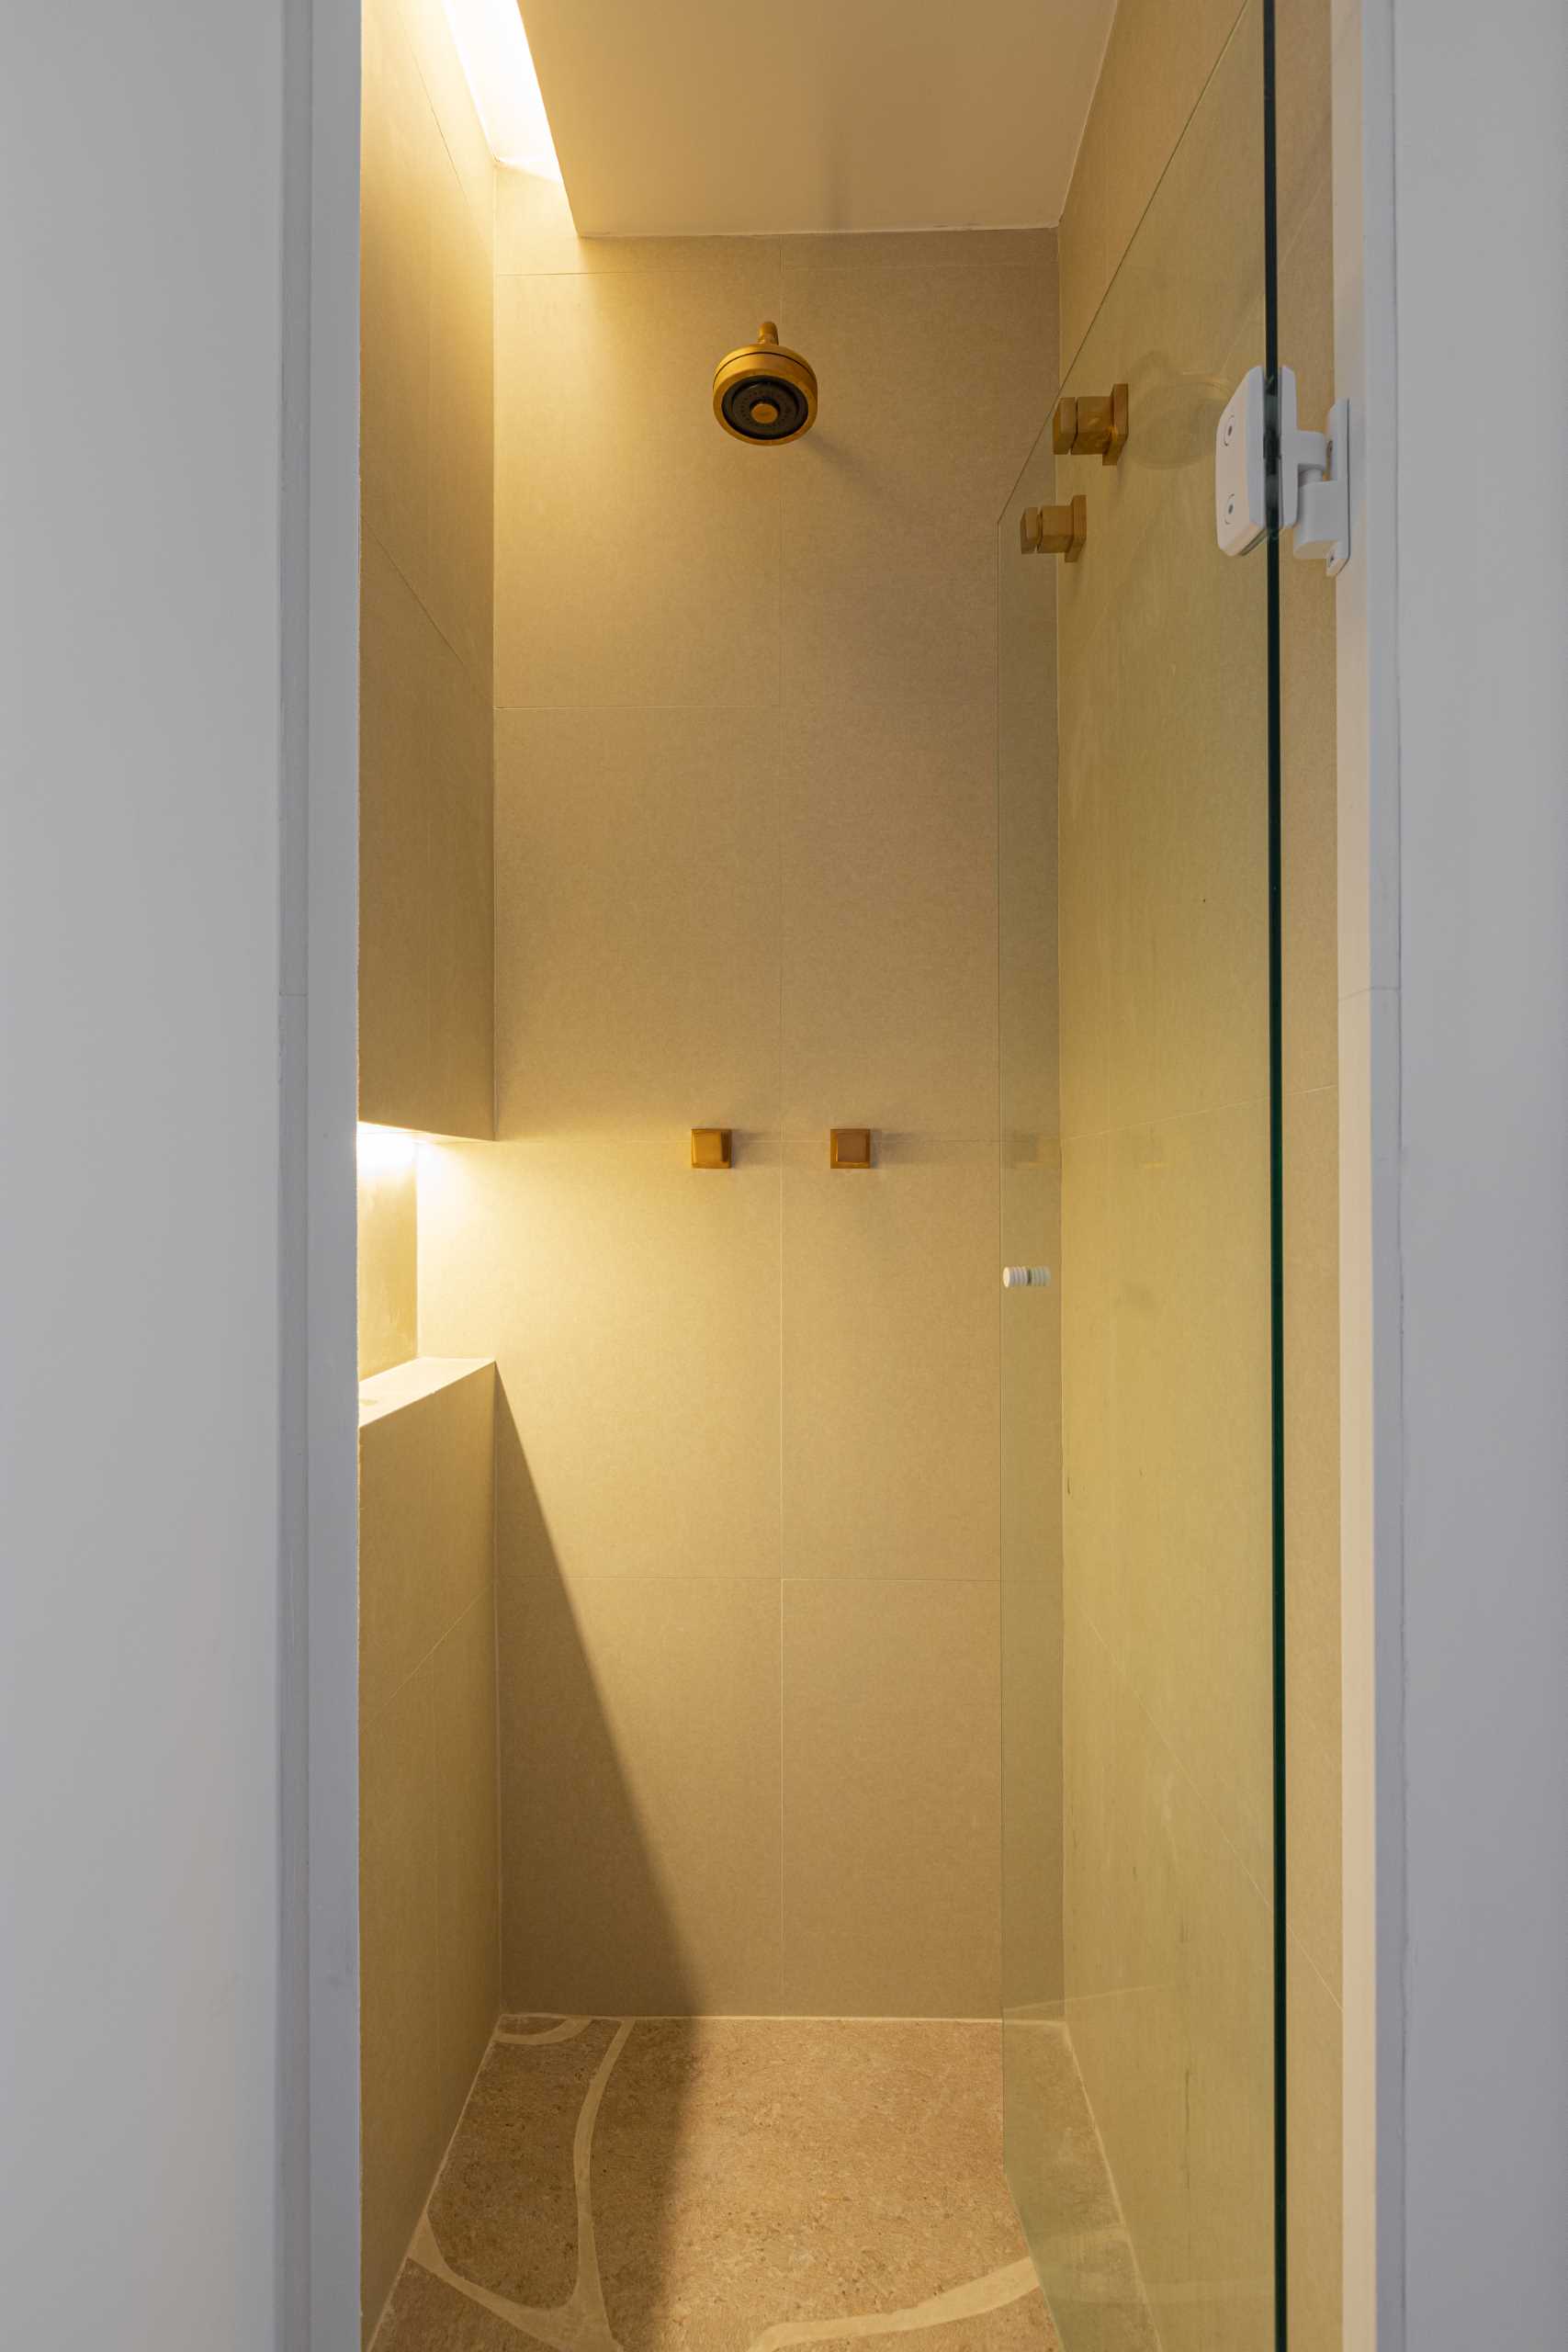 A shower with hidden lighting and a shelving niche.